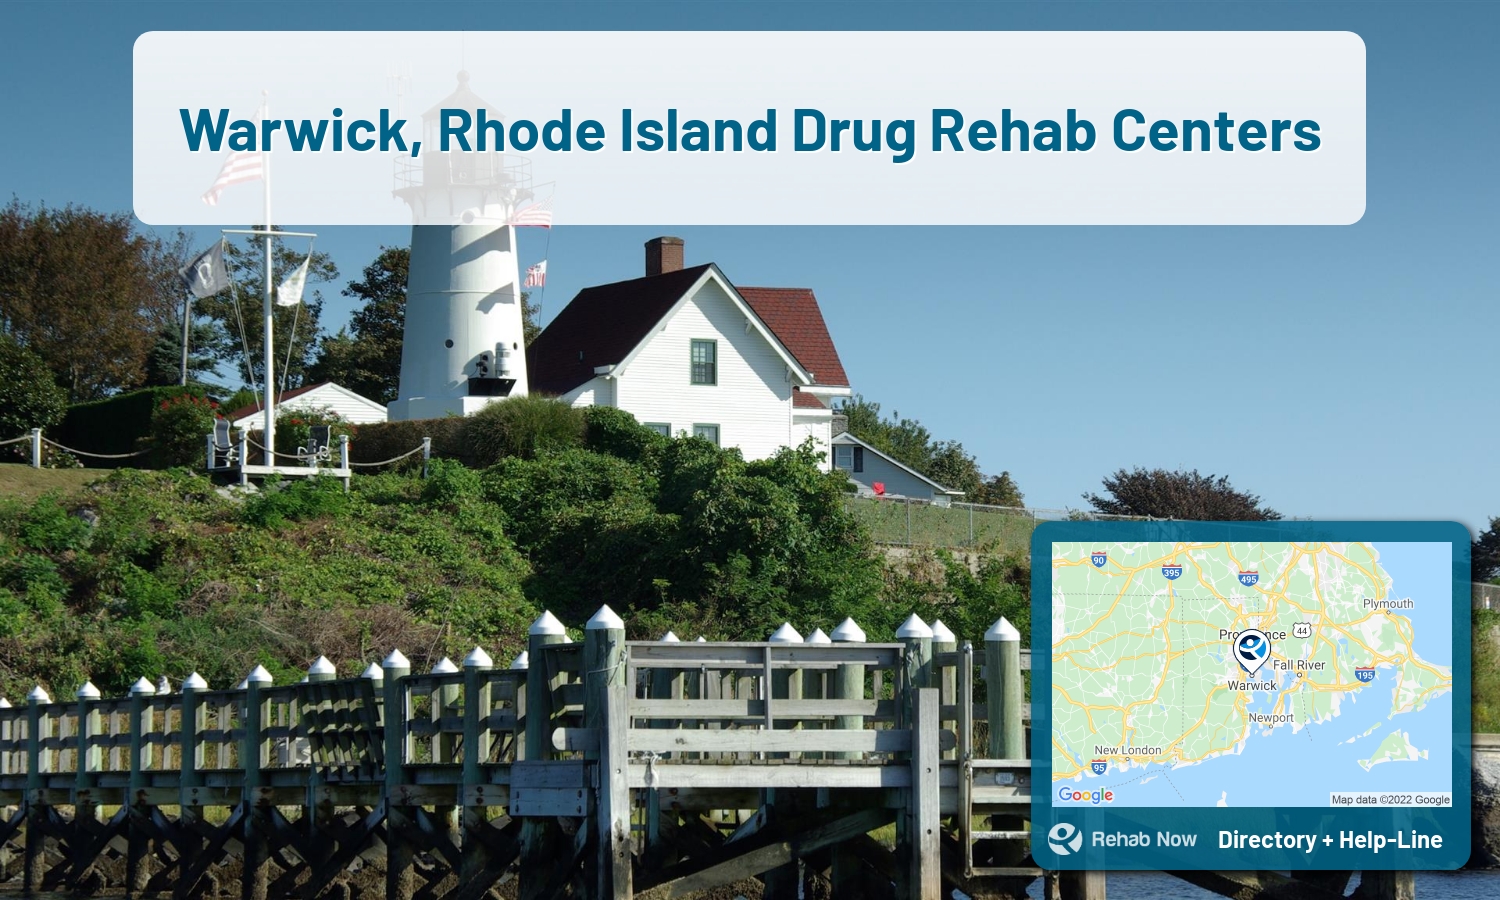 View options, availability, treatment methods, and more, for drug rehab and alcohol treatment in Warwick, Rhode Island